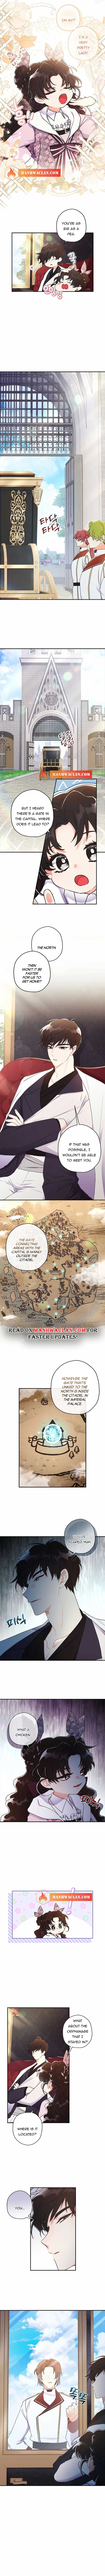 I Became the Male Lead’s Adopted Daughter Chapter 66 page 3 - MangaWeebs.in